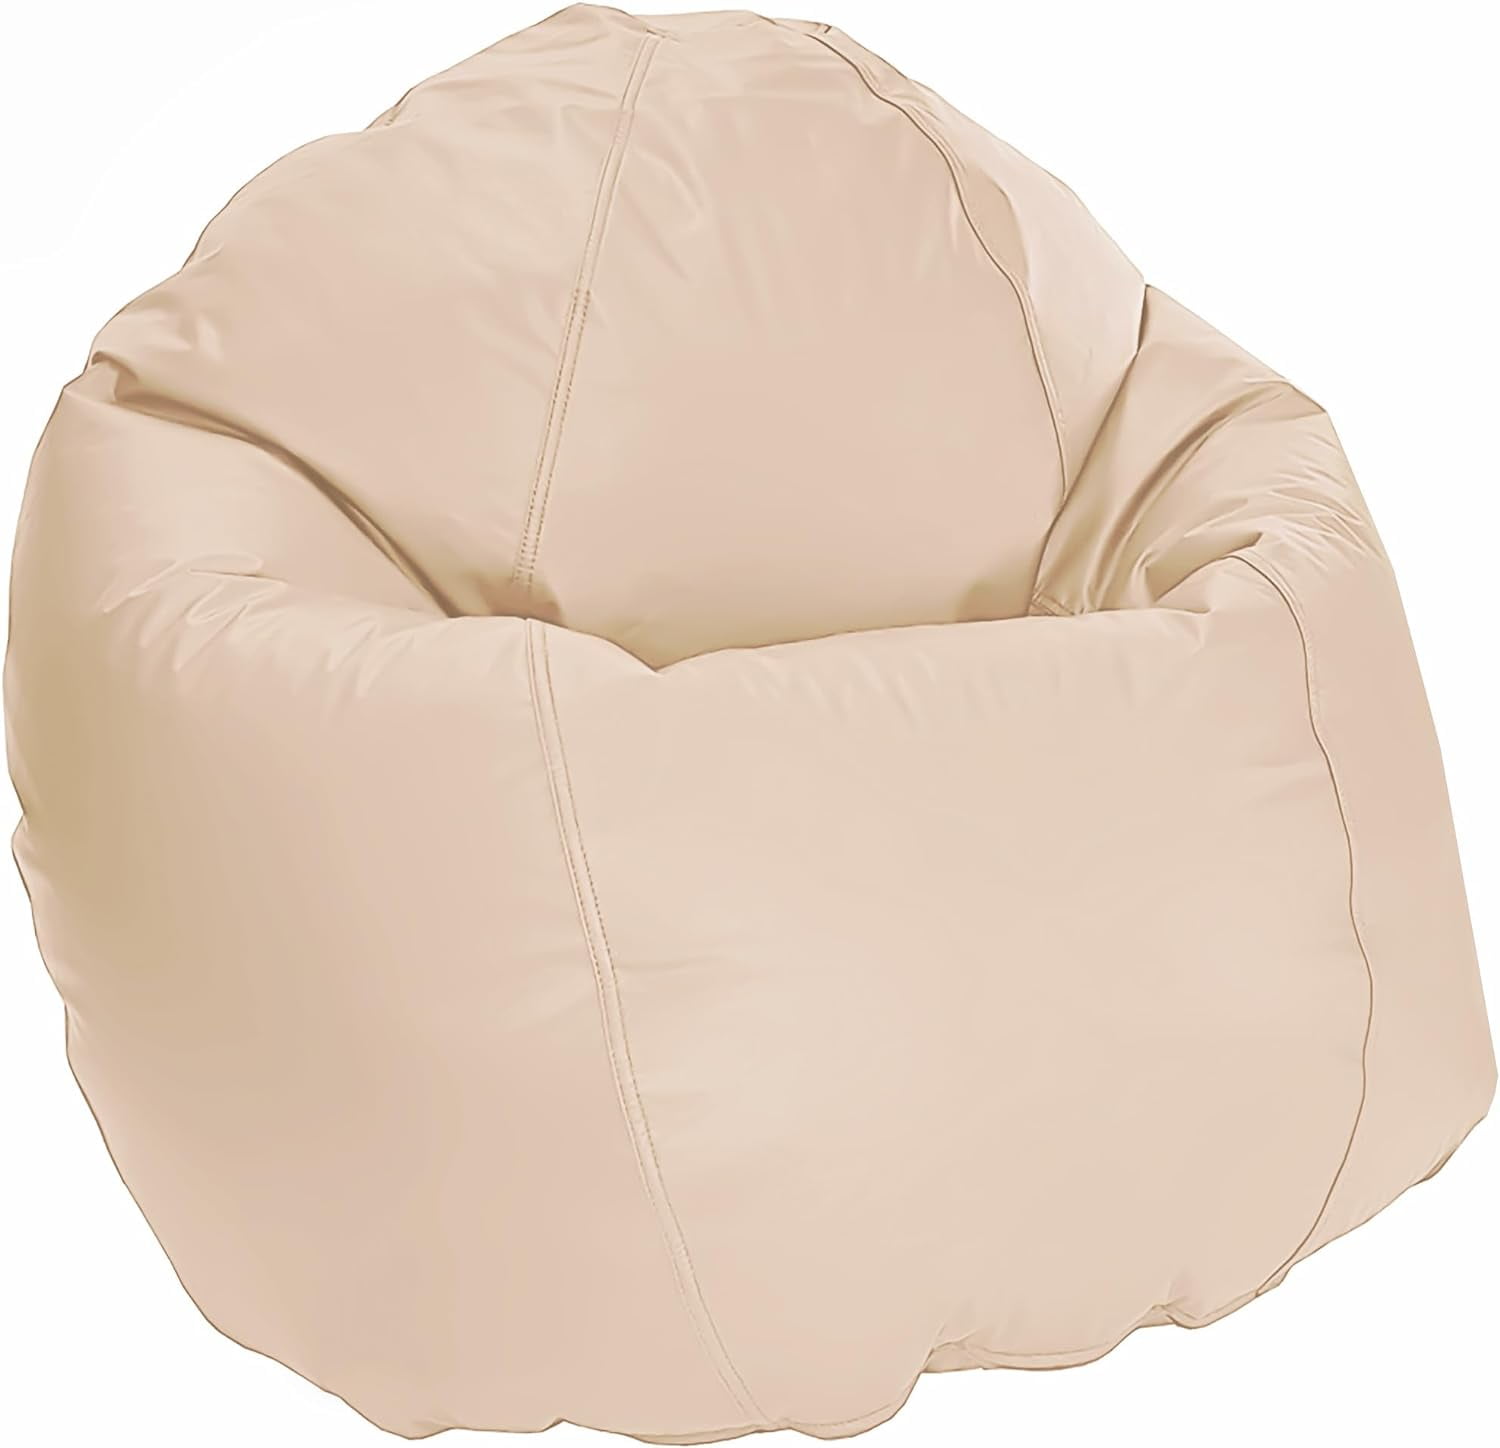 Bean Products Vinyl Bean Bag Chair With Polystyrene Beads And